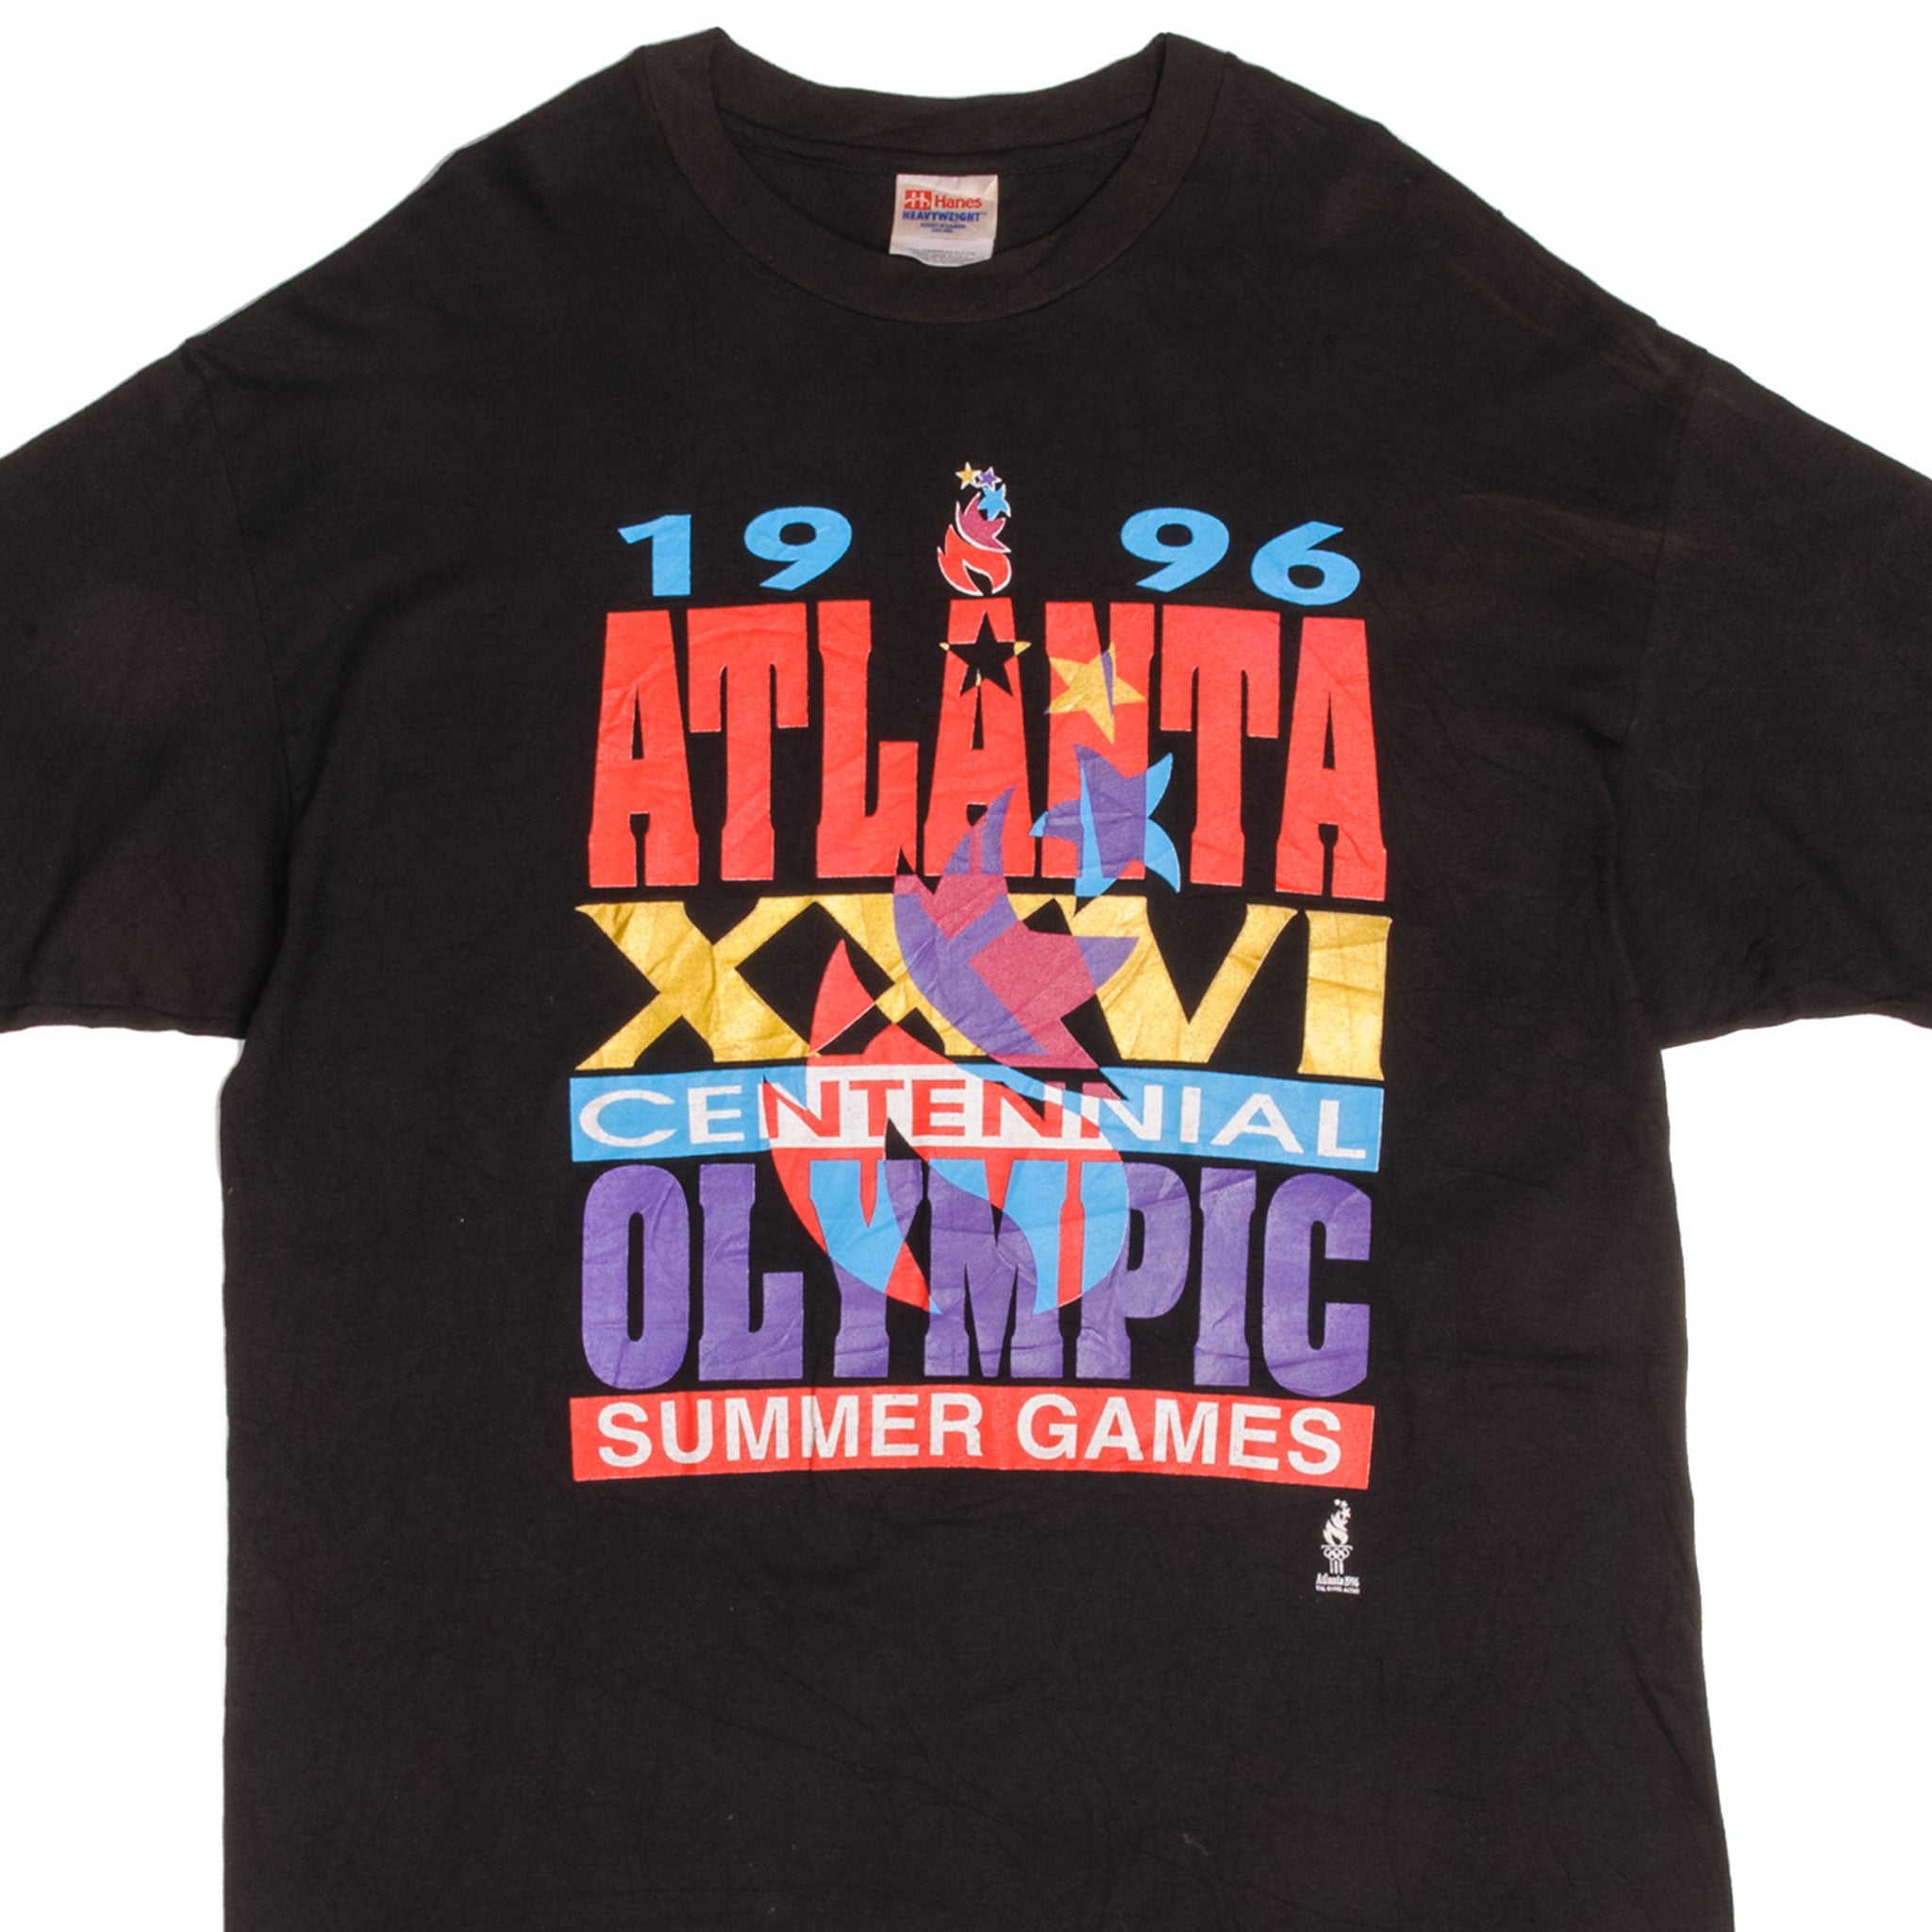 Sports / College Vintage Atlanta Olympics Summer Games 1996 Tee Shirt Size XL Made in USA